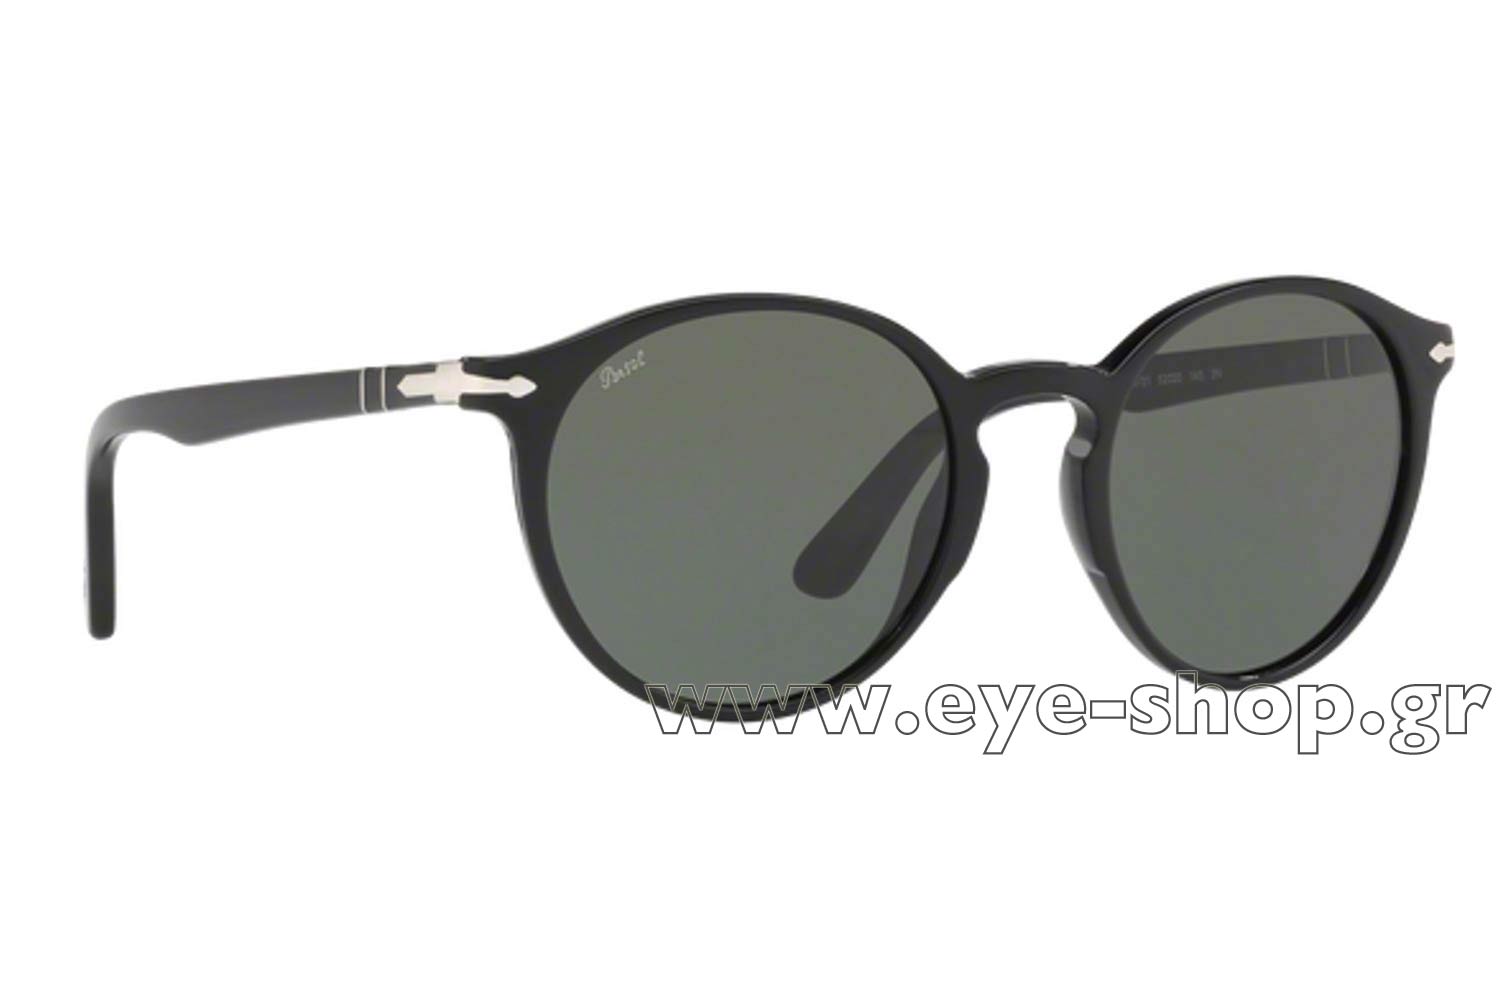 Persol 3171S